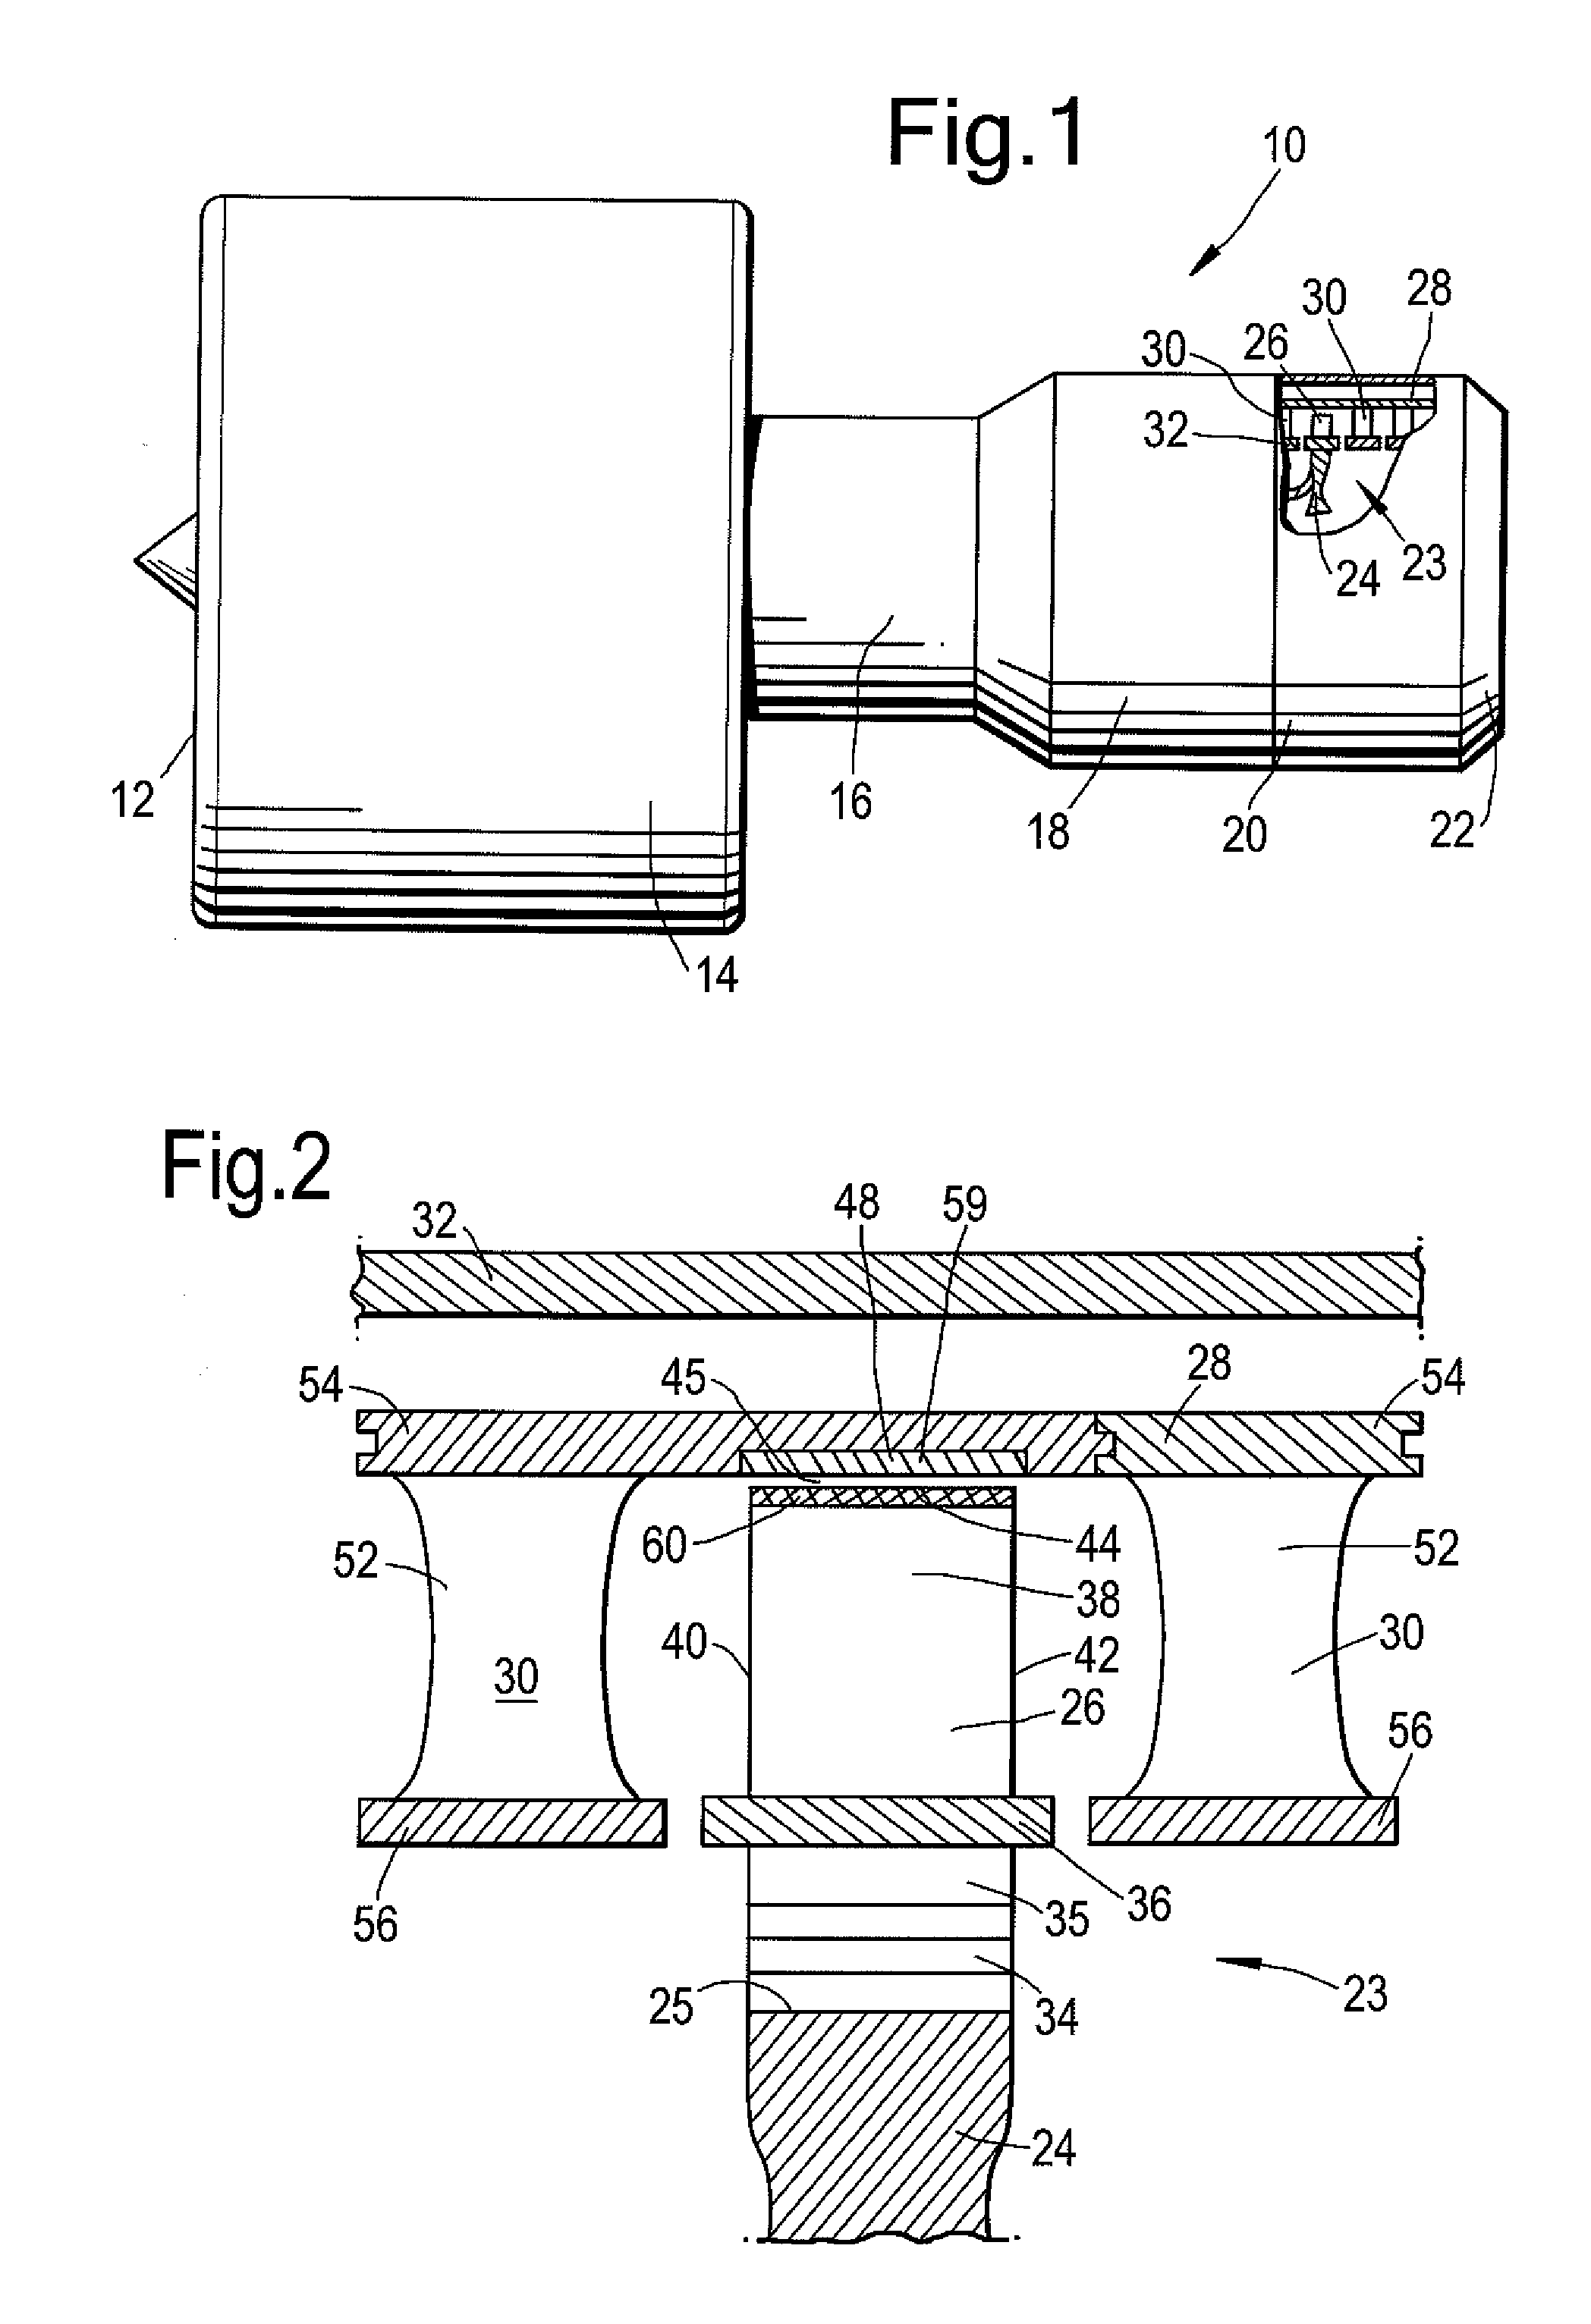 Component having an abrasive layer and a method of applying an abrasive layer on a component